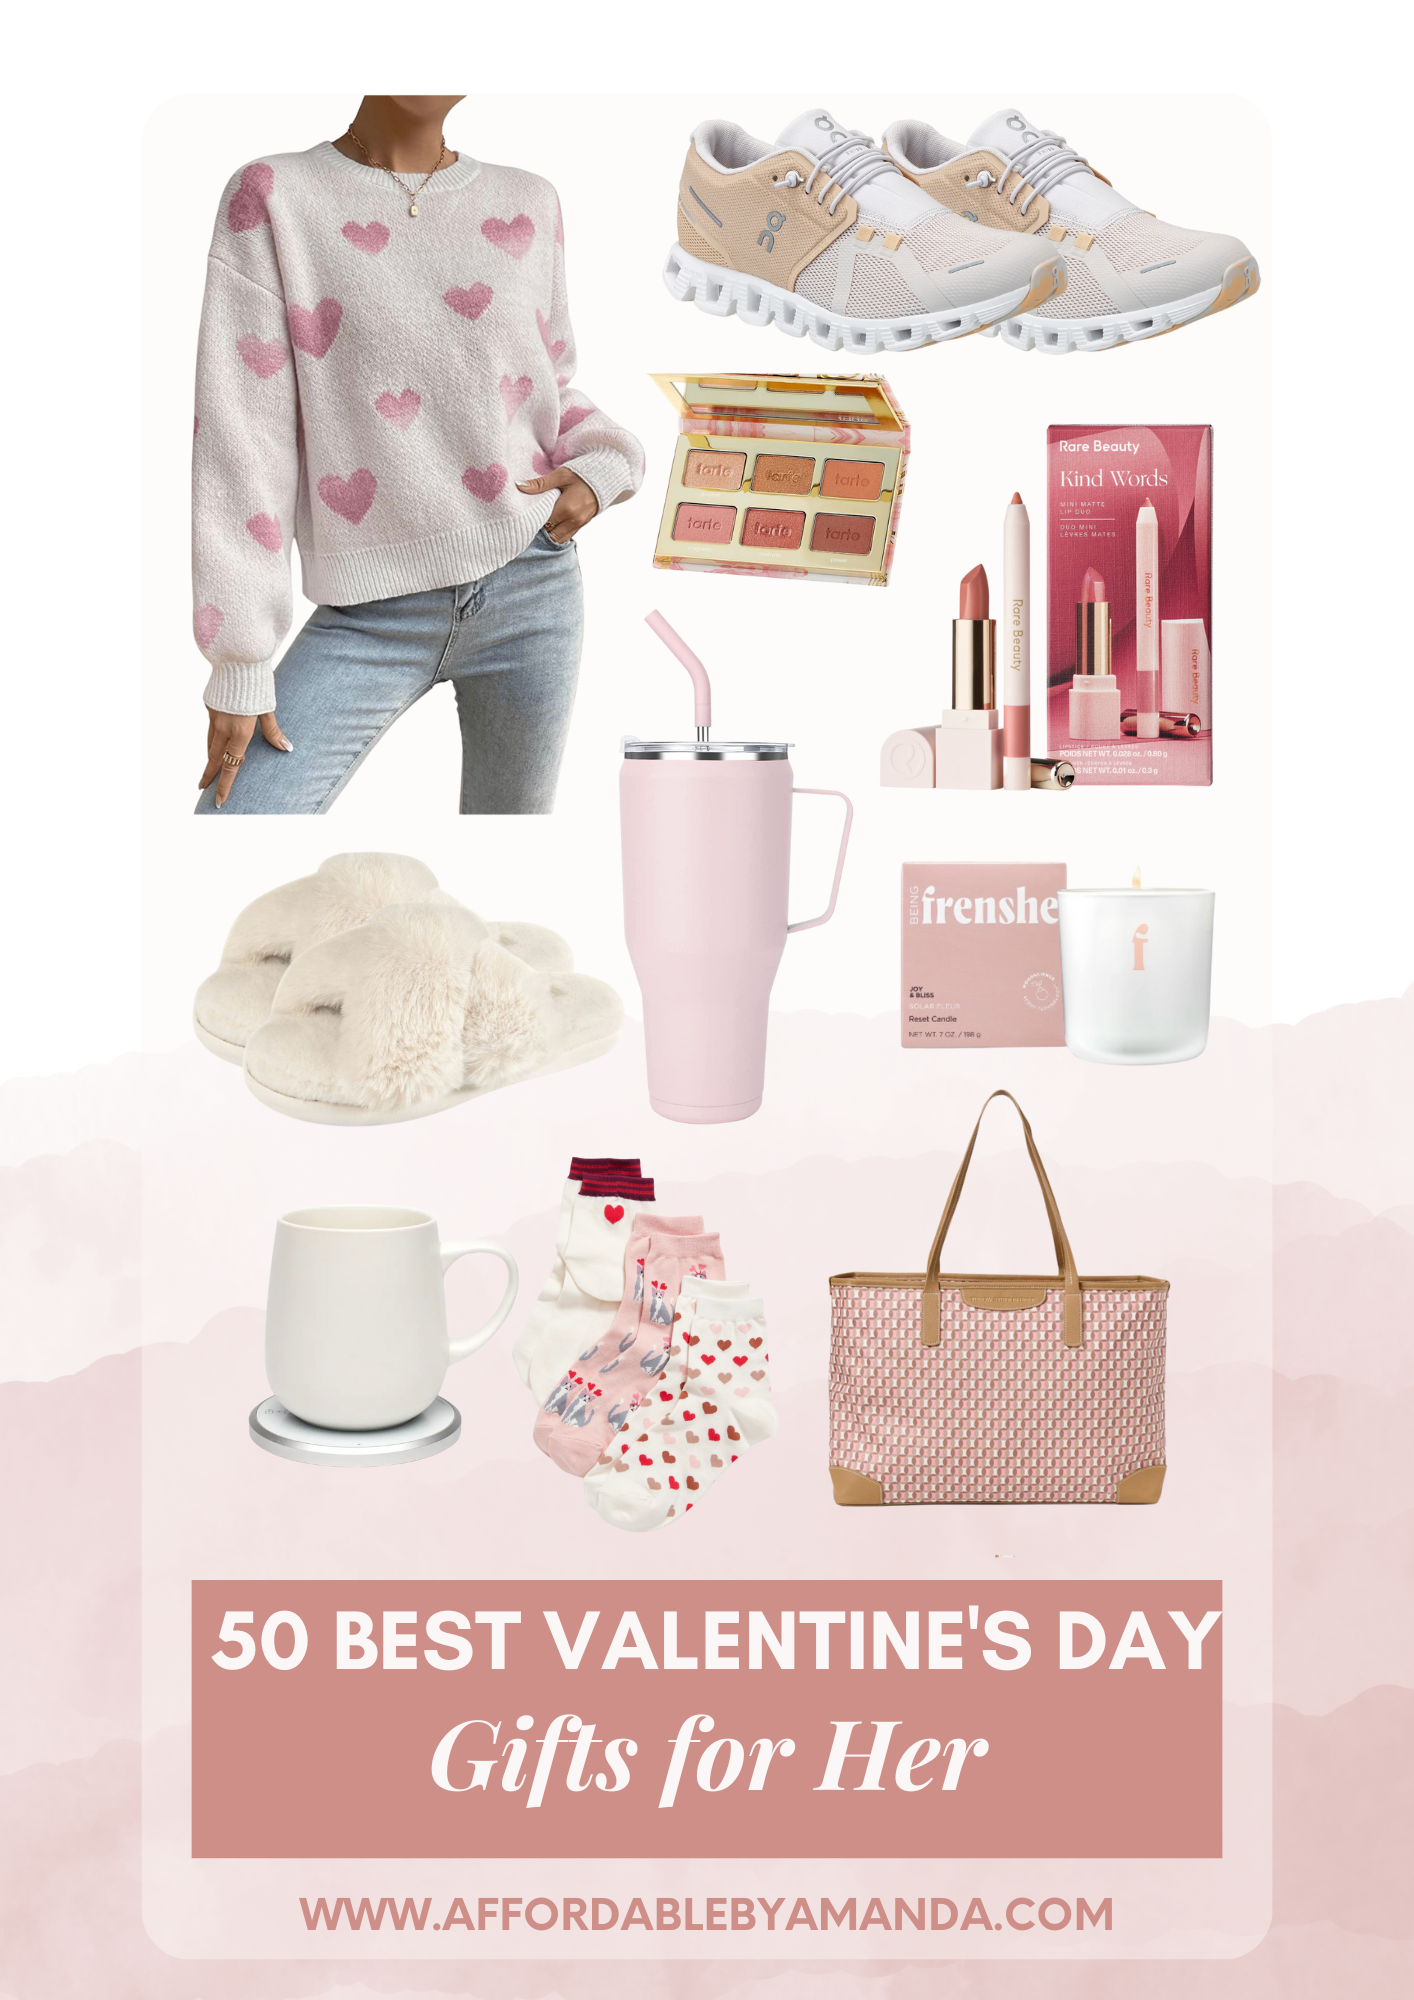 The 7 Best Valentine's Gift Ideas For A Truly Unique Celebration